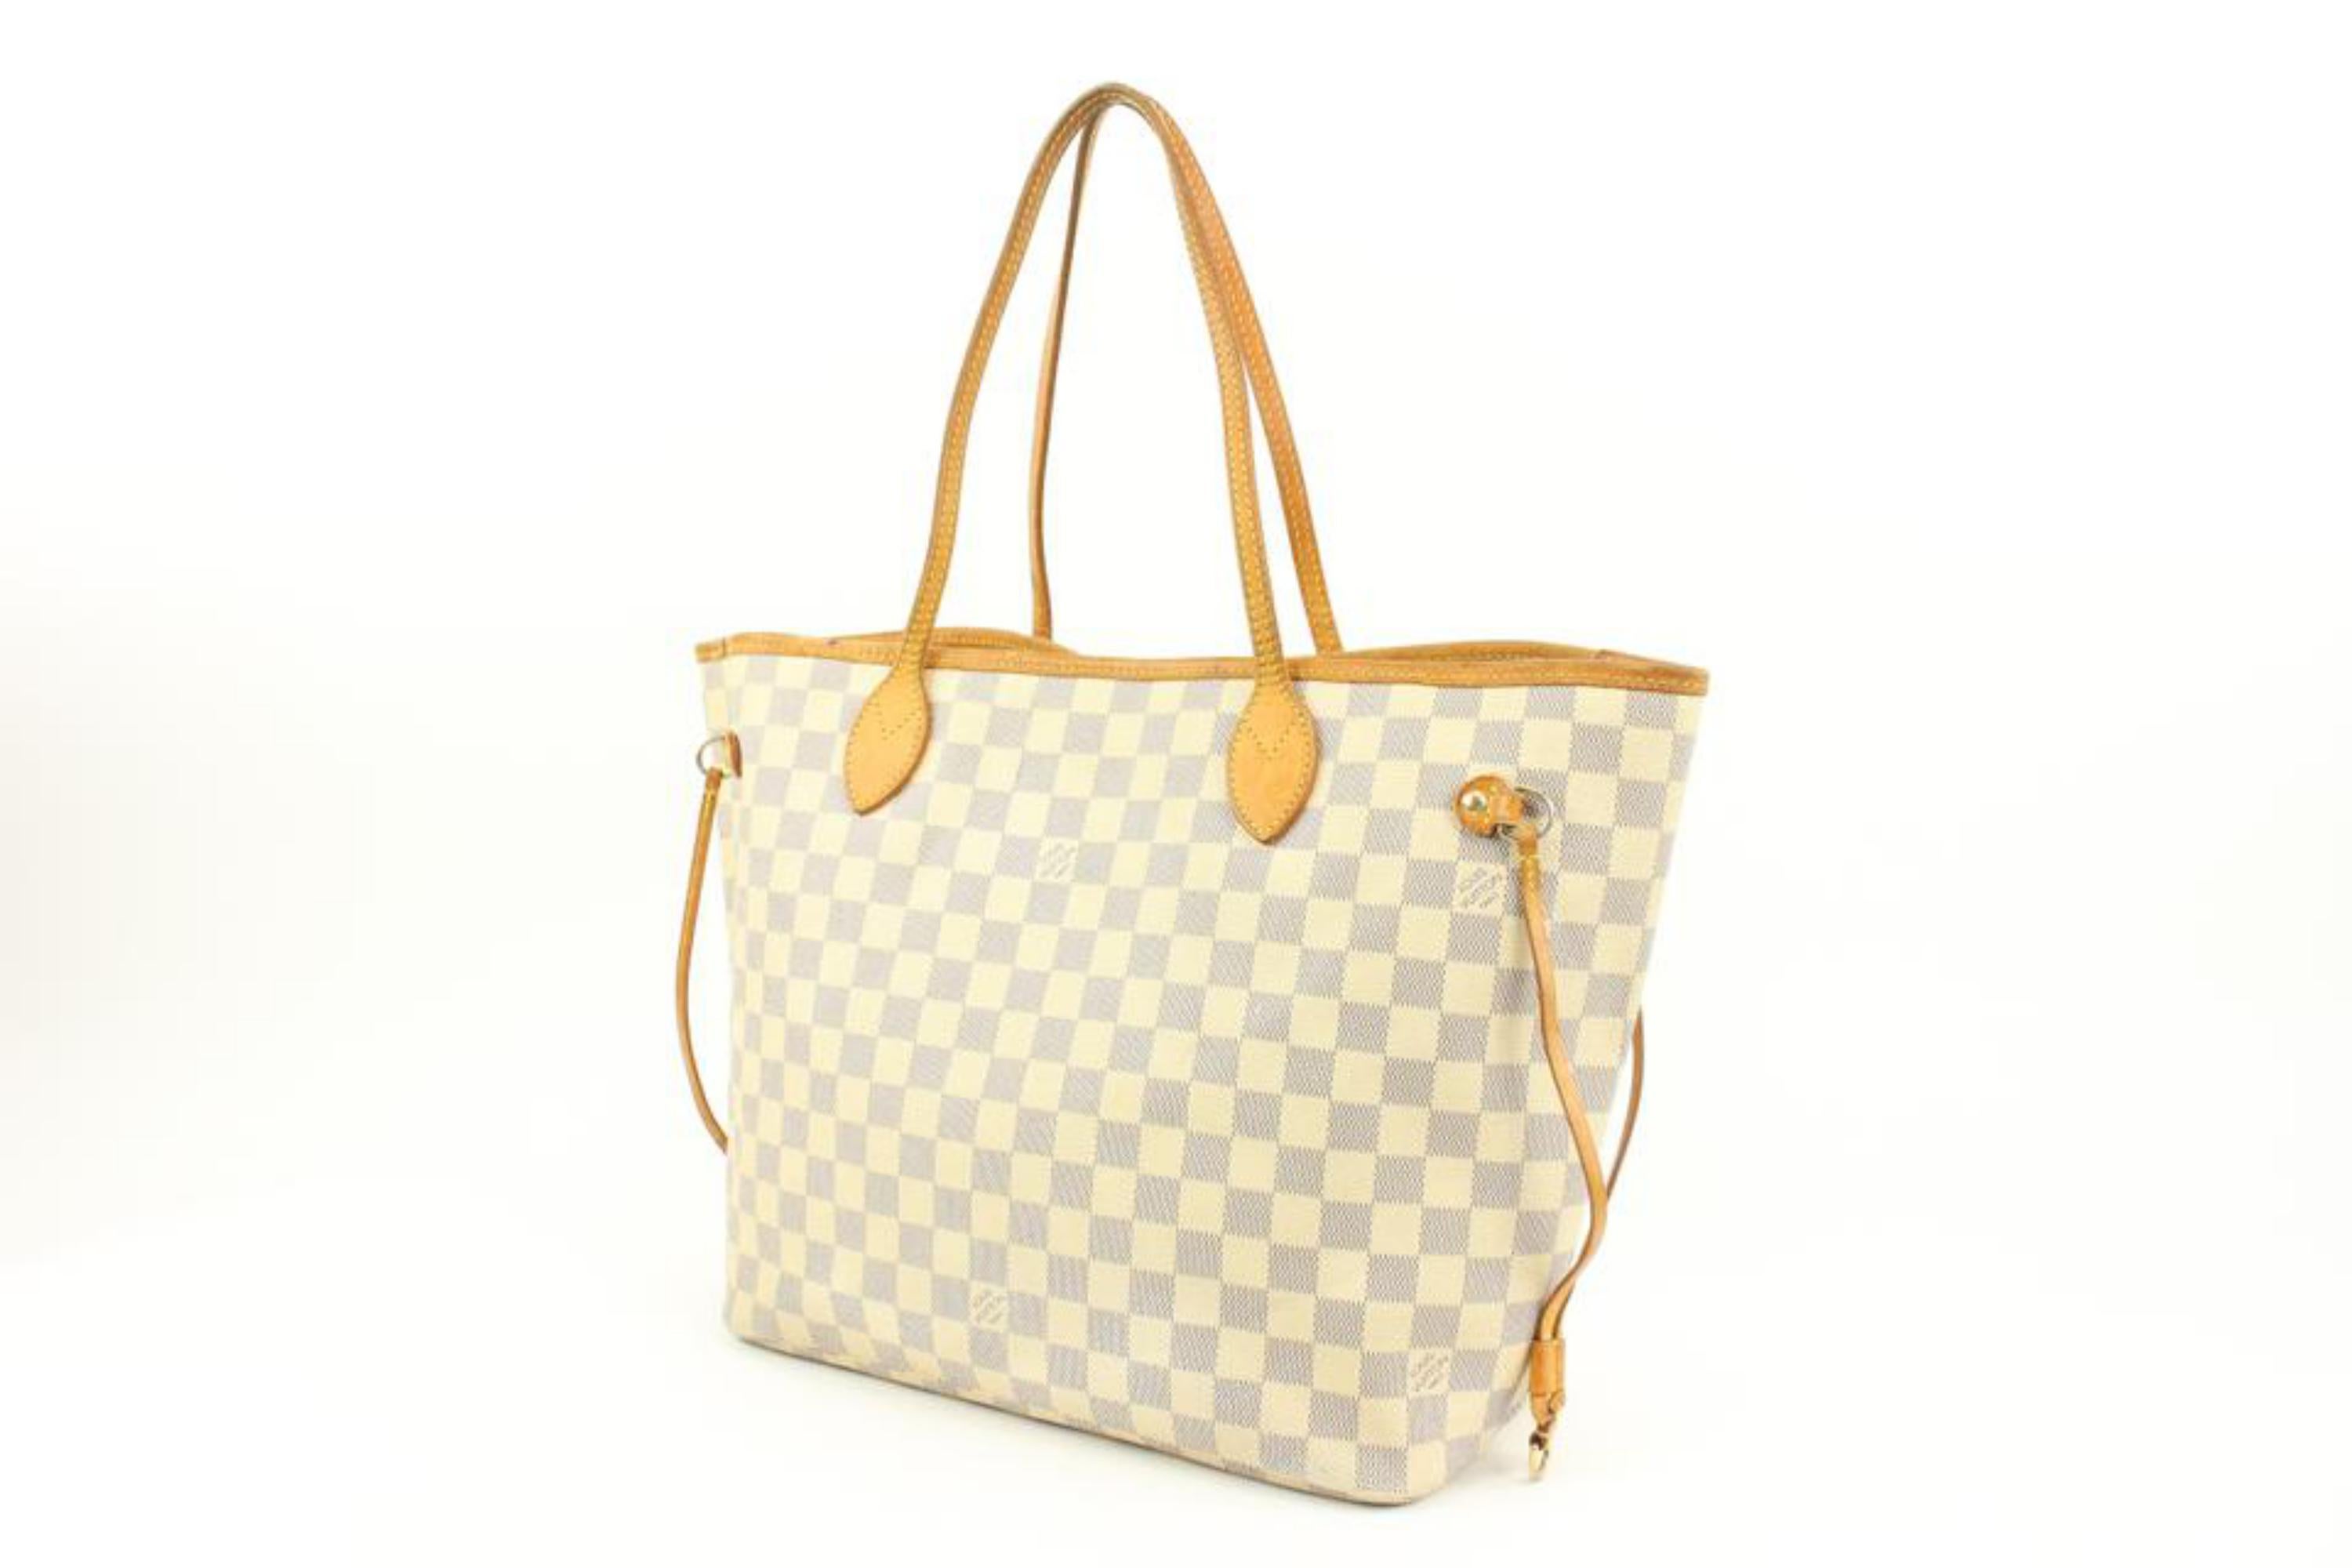 Louis Vuitton Damier Azur Neverfull MM Tote Bag 10lv216s
Date Code/Serial Number: AR3170
Made In: France
Measurements: Length:  18